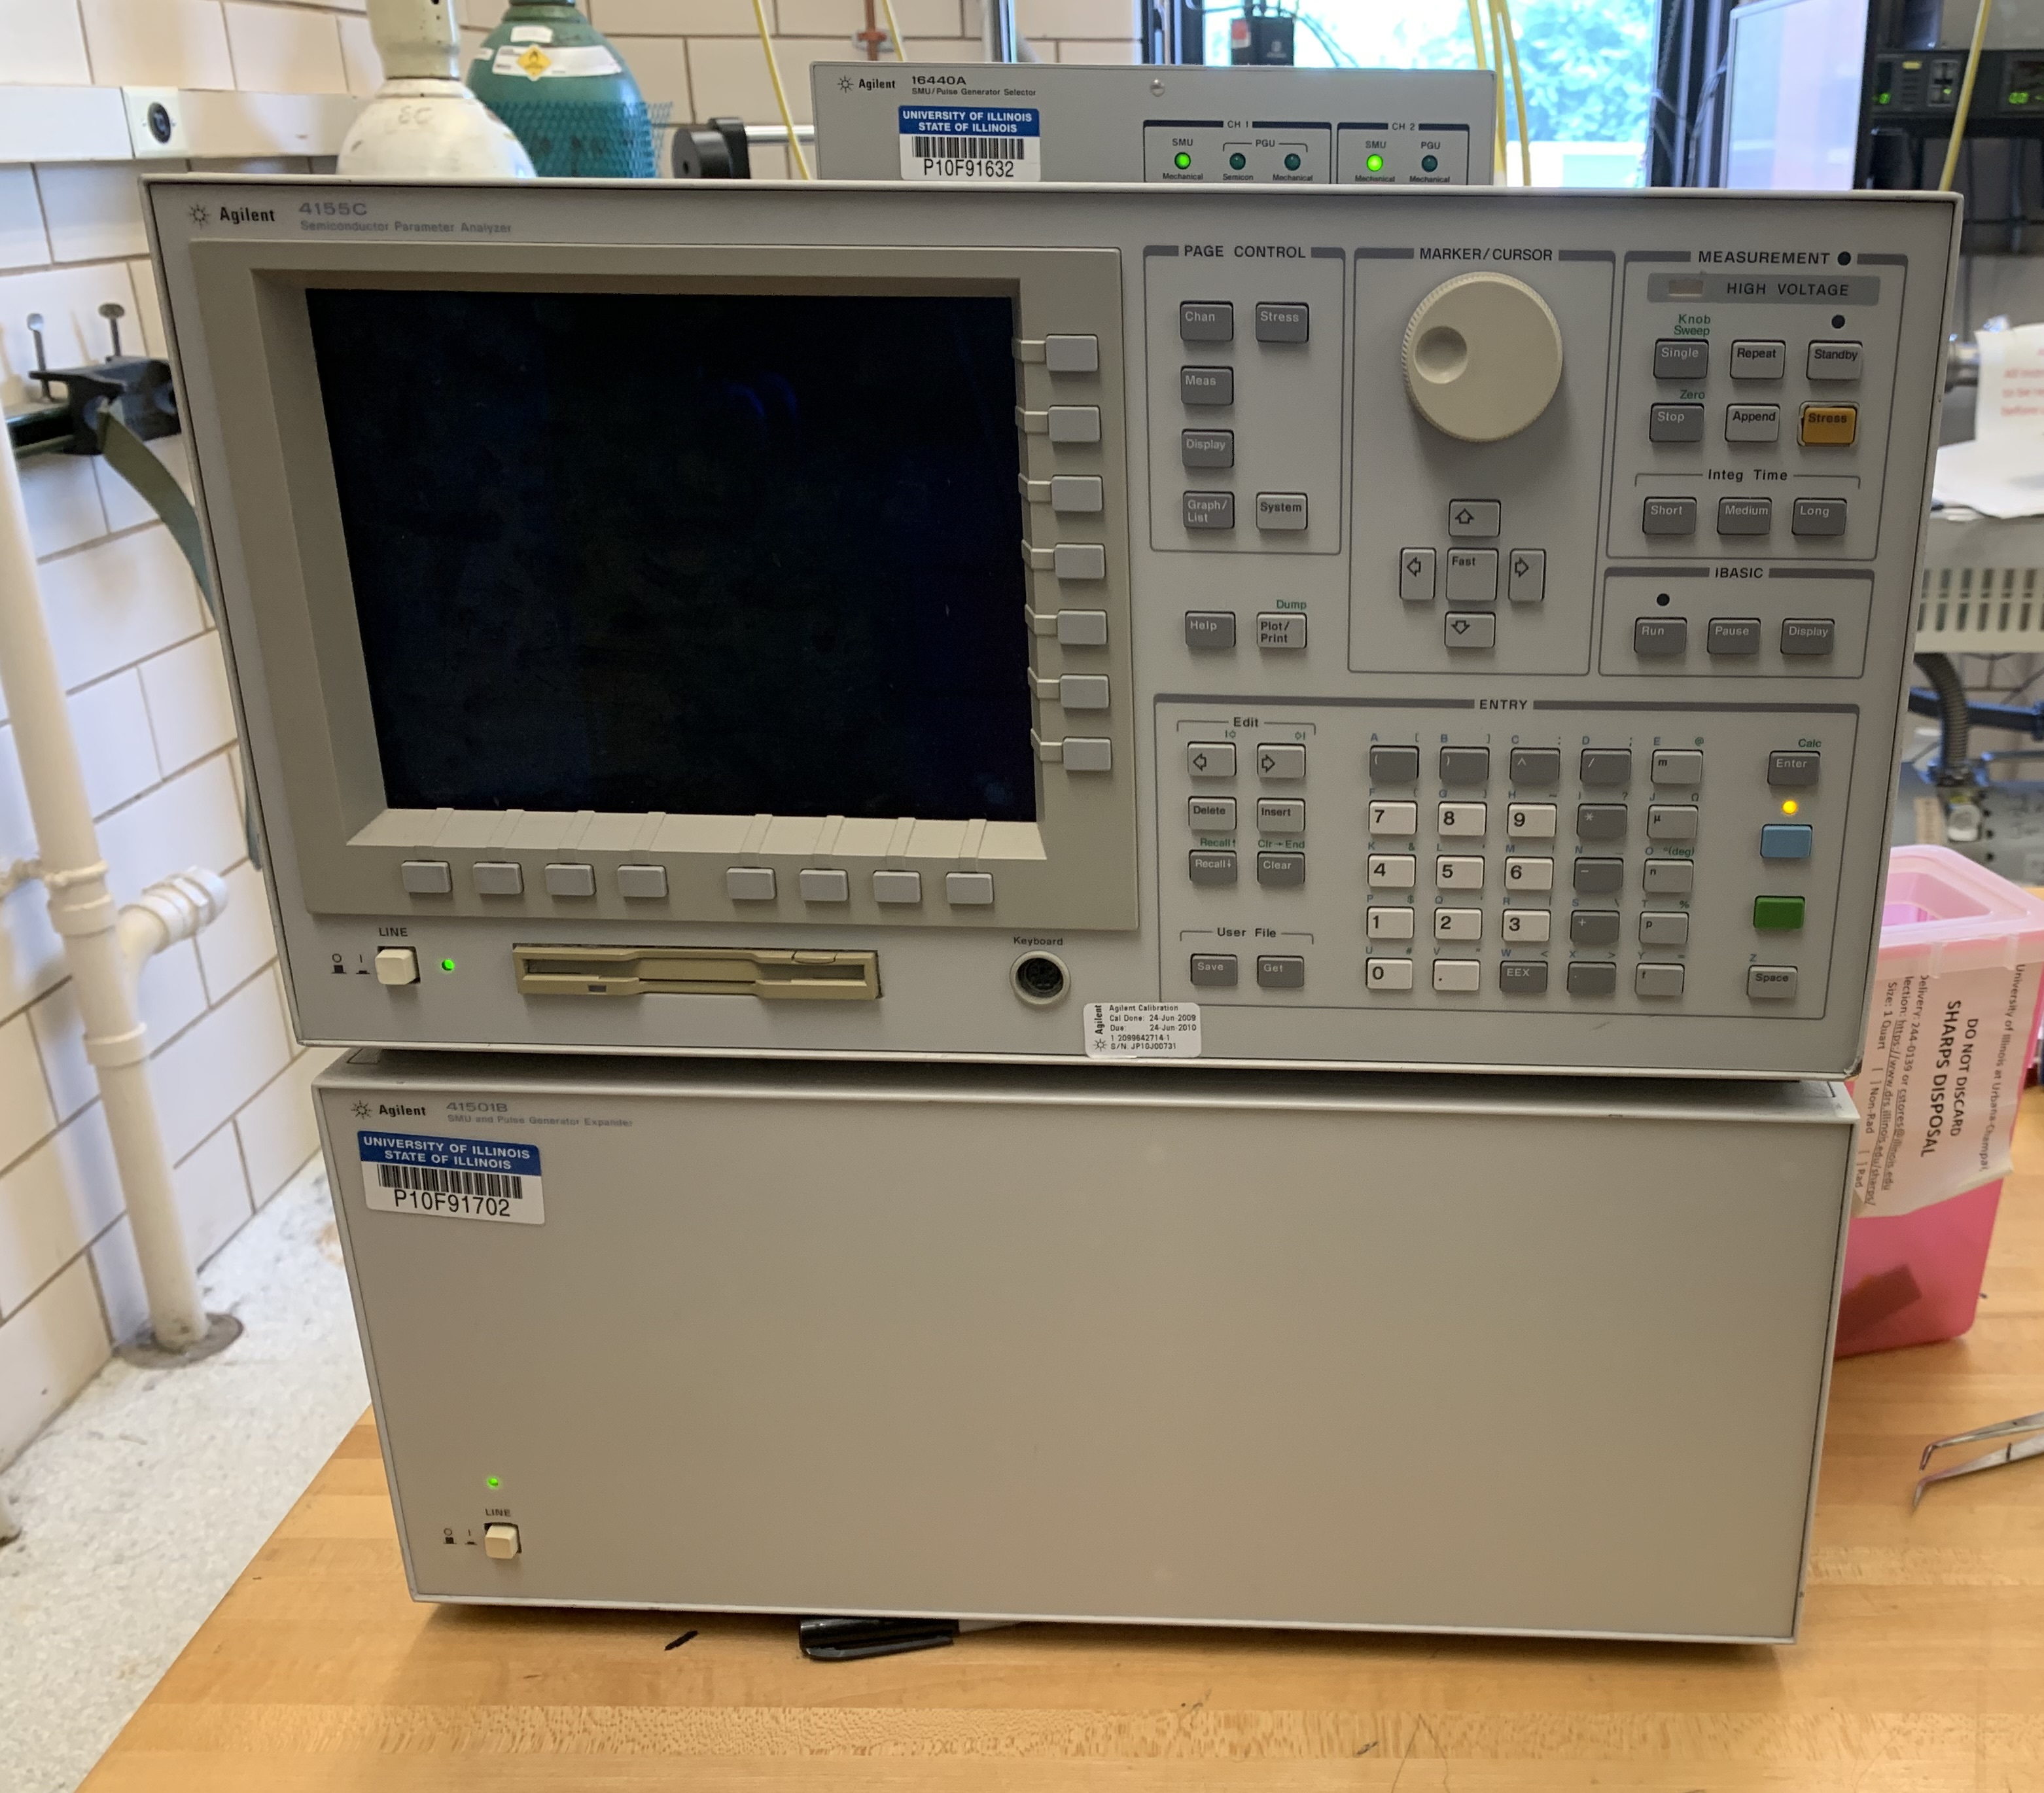 4155c Semiconductor Parameter Analyzer (Agilent), used with Lake Shore and custom probe station